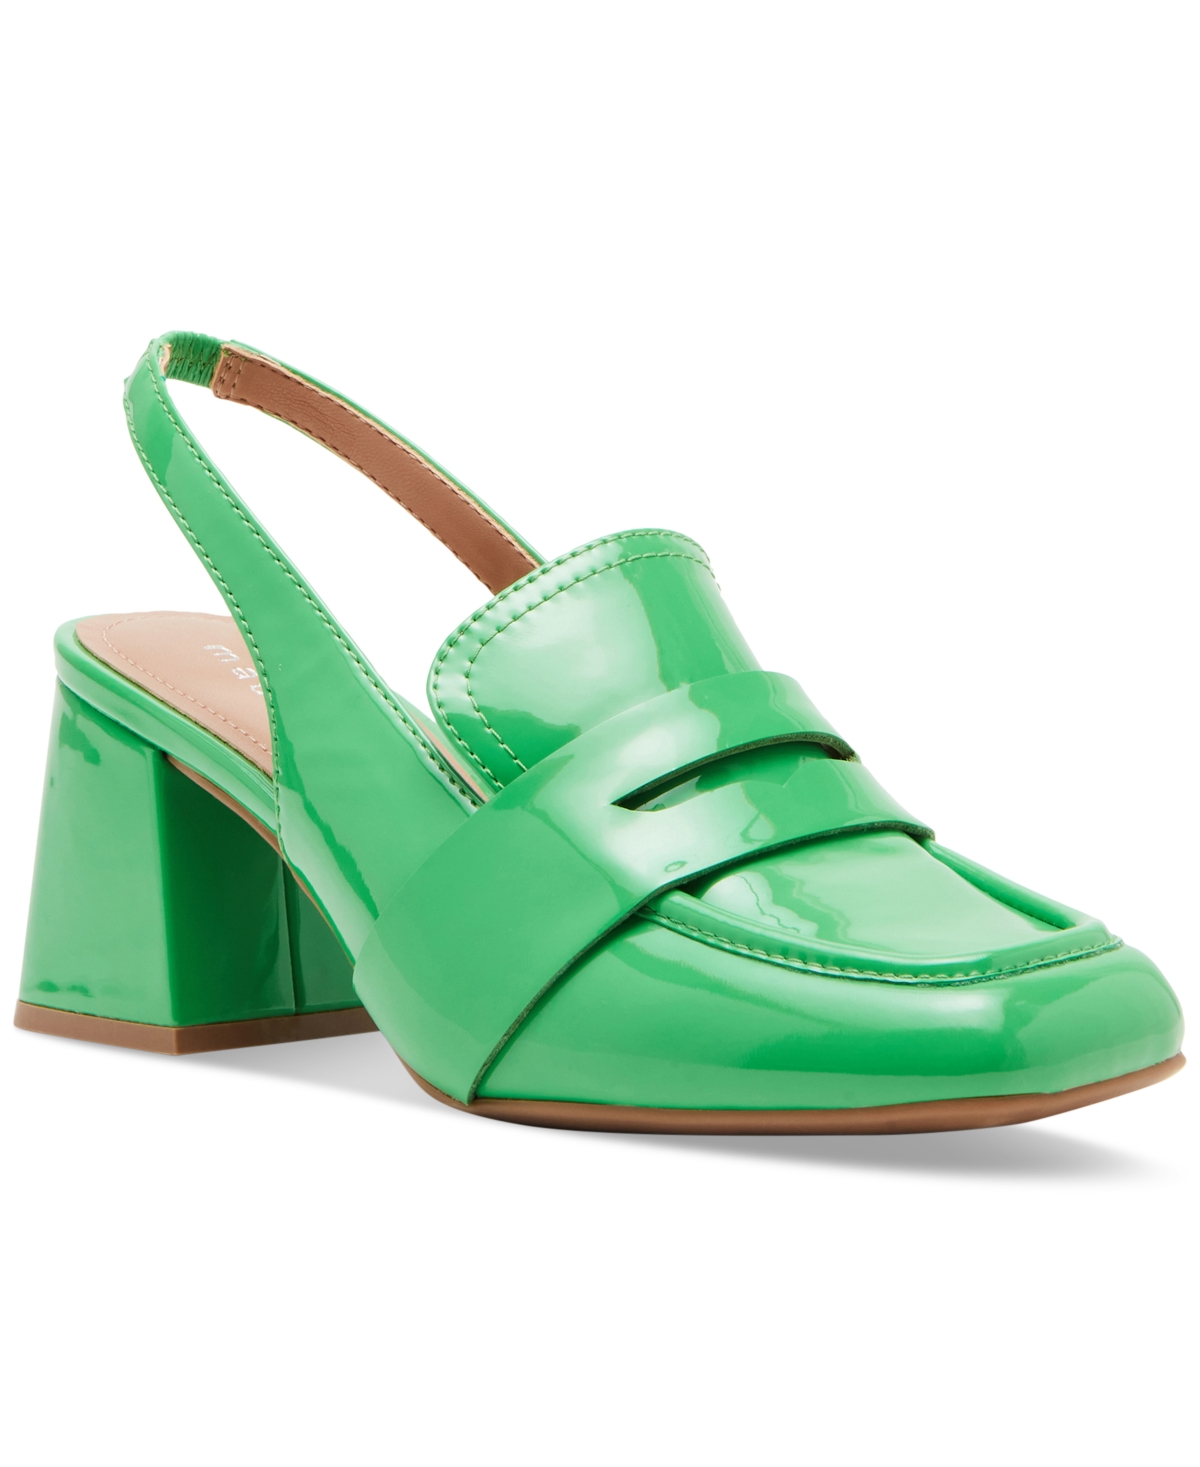 Madden Girl Britanna Slingback Tailored Loafer Pumps In Green Patent